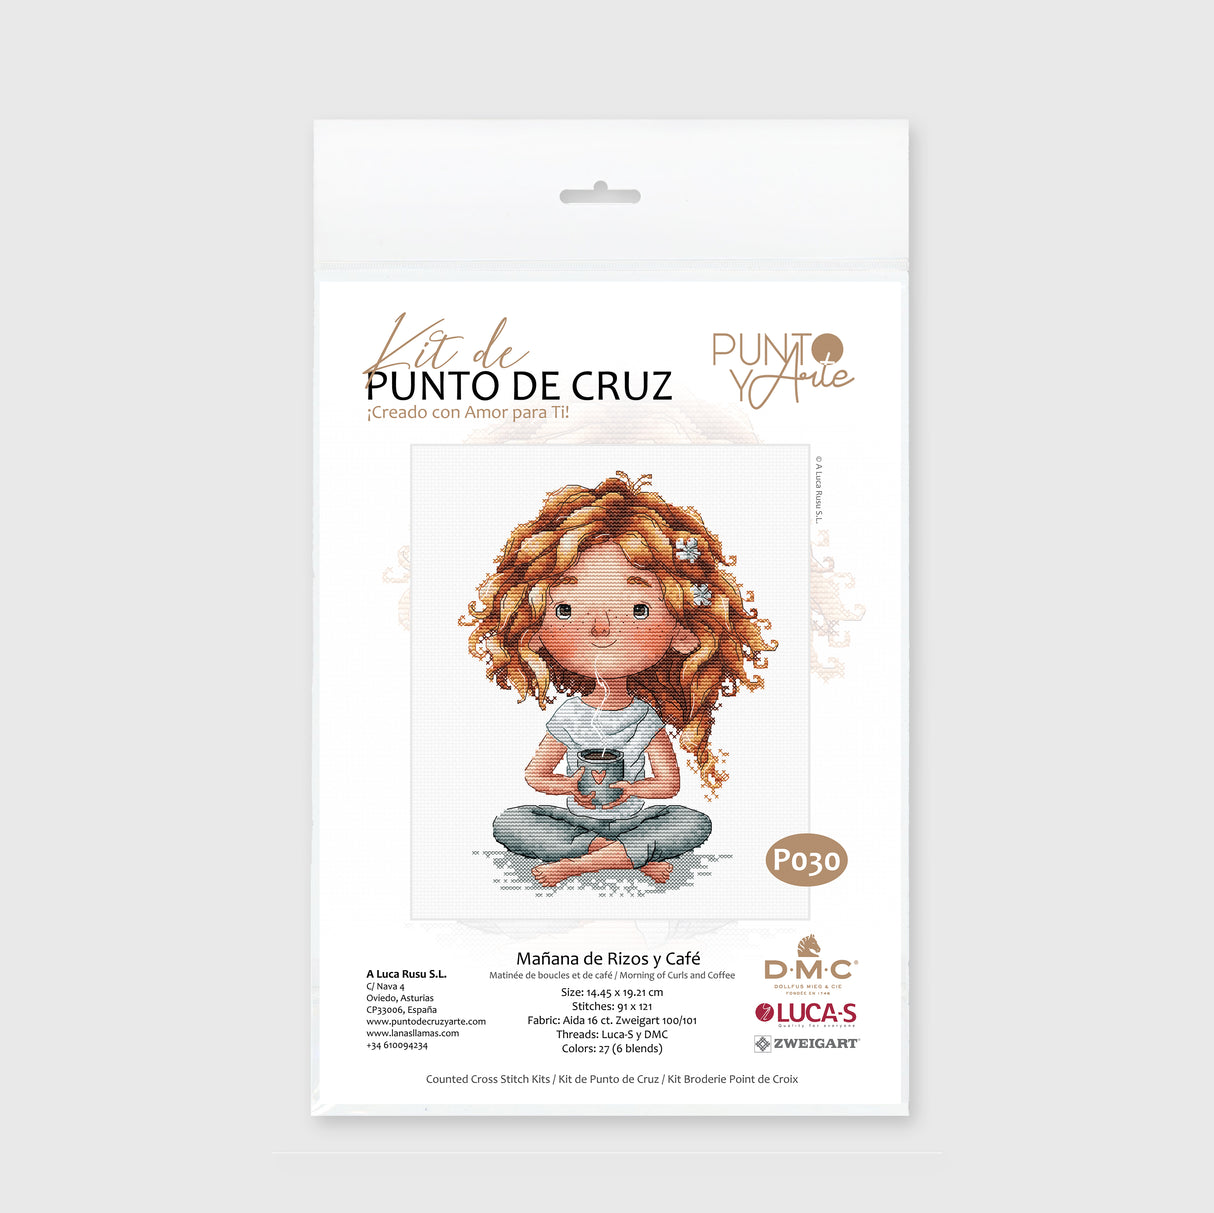 Cross stitch kit - Punto y Arte P030 - Morning of Curls and Coffee